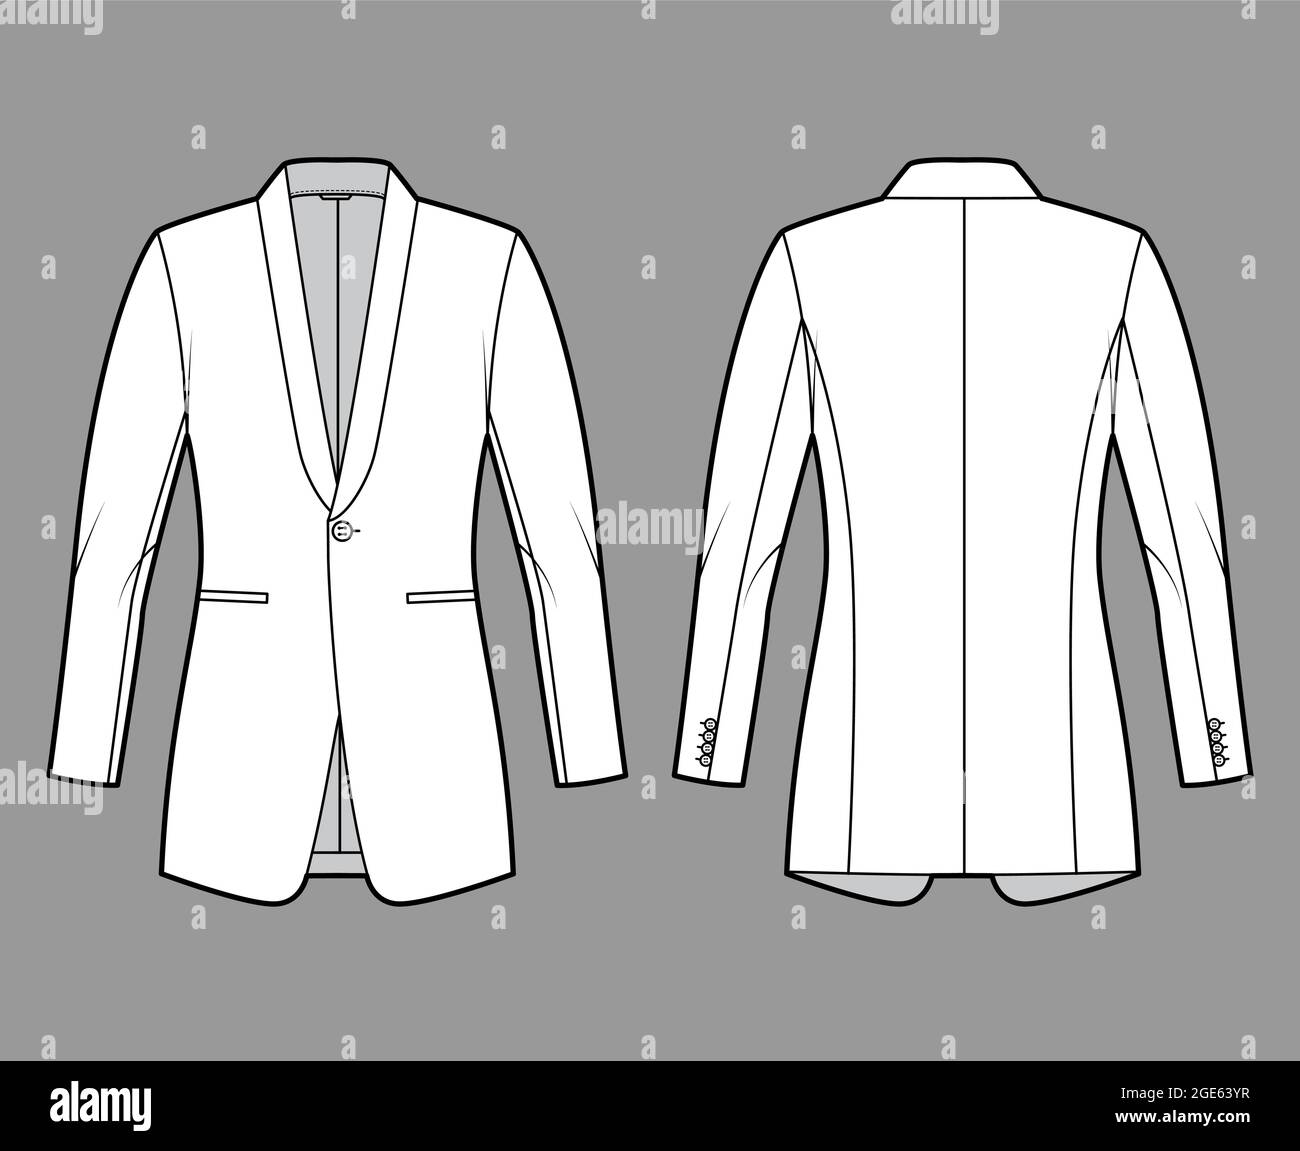 Dinner fitted jacket suit tuxedo technical fashion illustration with single breasted, long sleeves, jetted pockets. Flat coat blazer template front, back, white color style. Women unisex CAD mockup Stock Vector